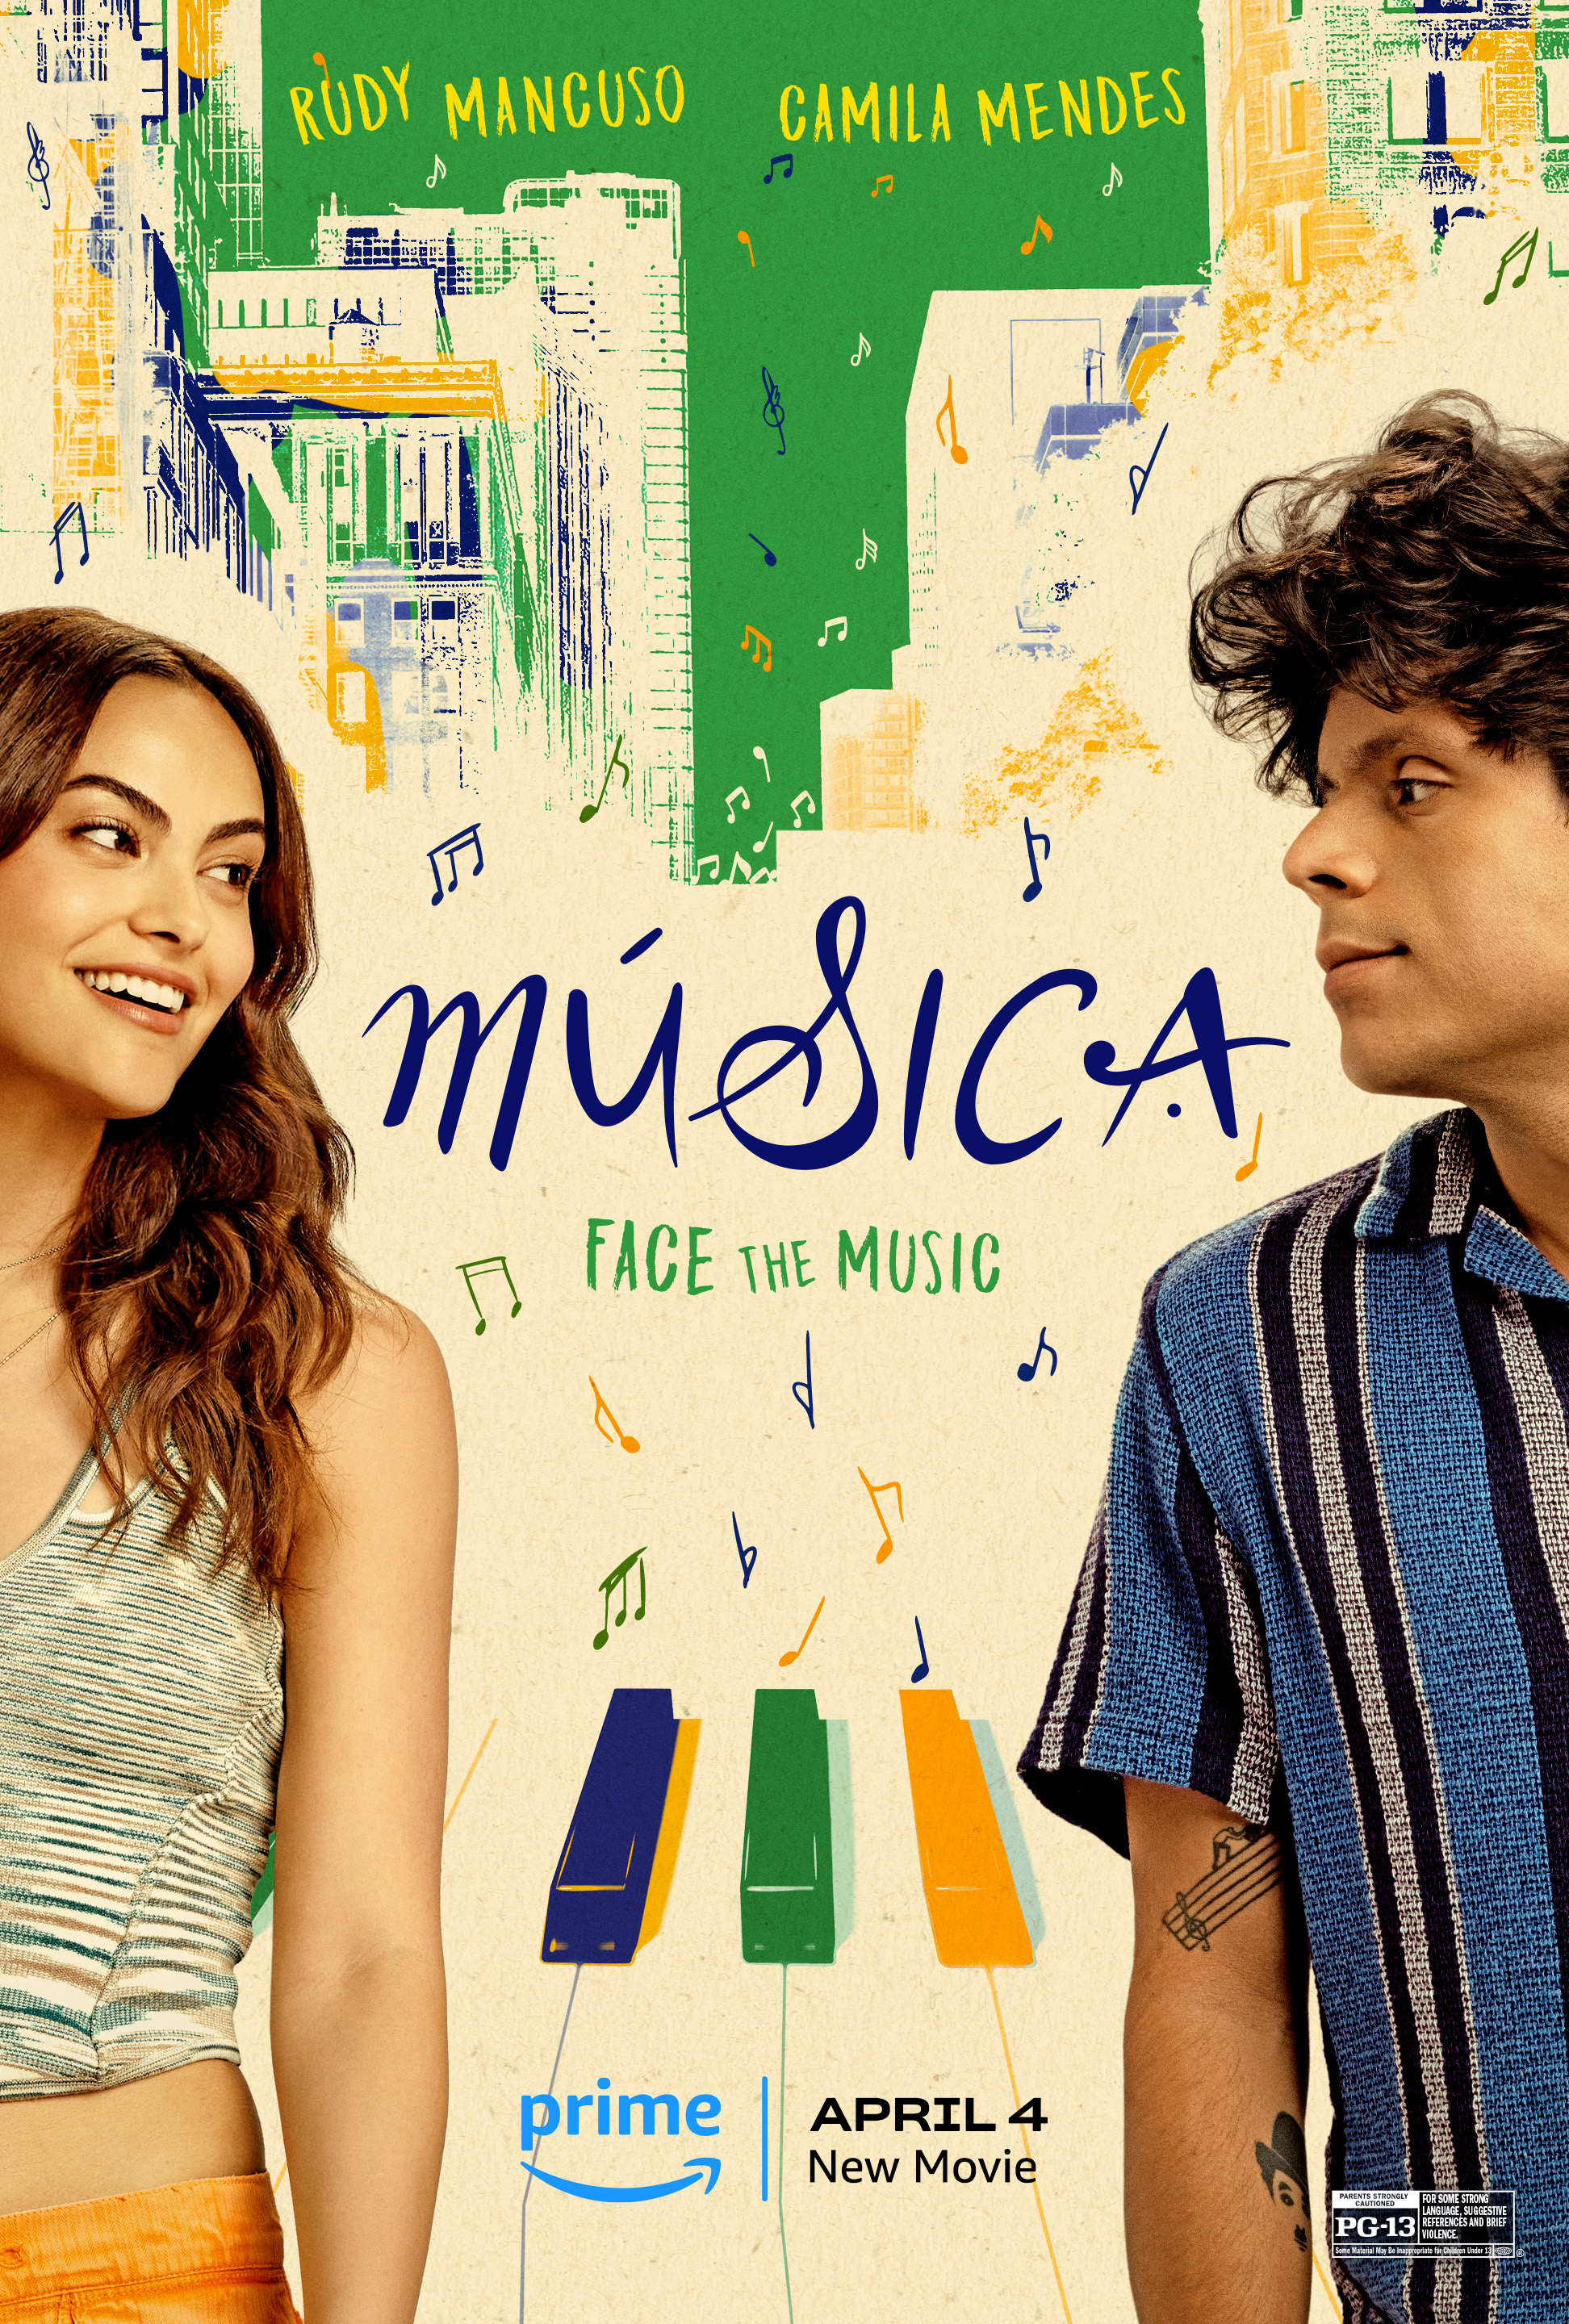 Movie poster for &quot;Música&quot; featuring Camila Mendes and Rudy Mancuso, with musical motifs and release date April 4